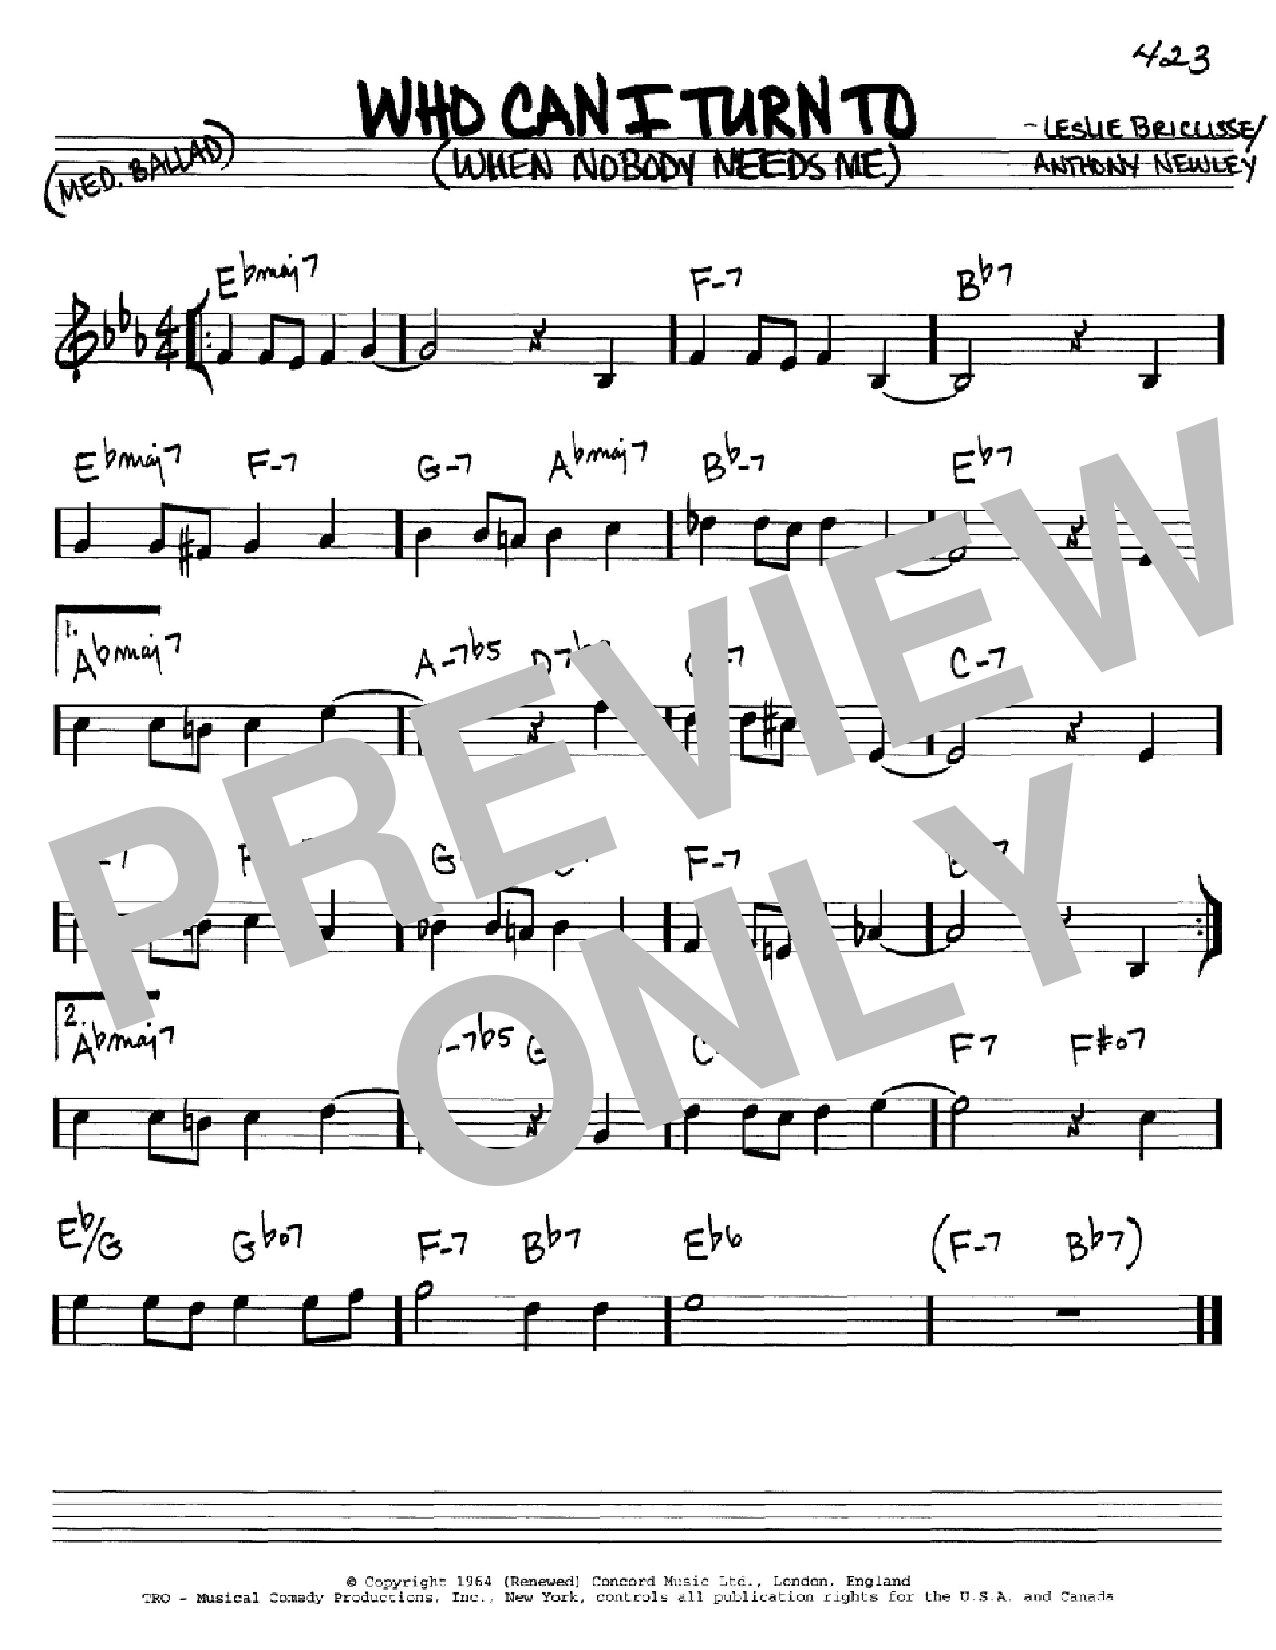 Download Tony Bennett Who Can I Turn To (When Nobody Needs Me Sheet Music